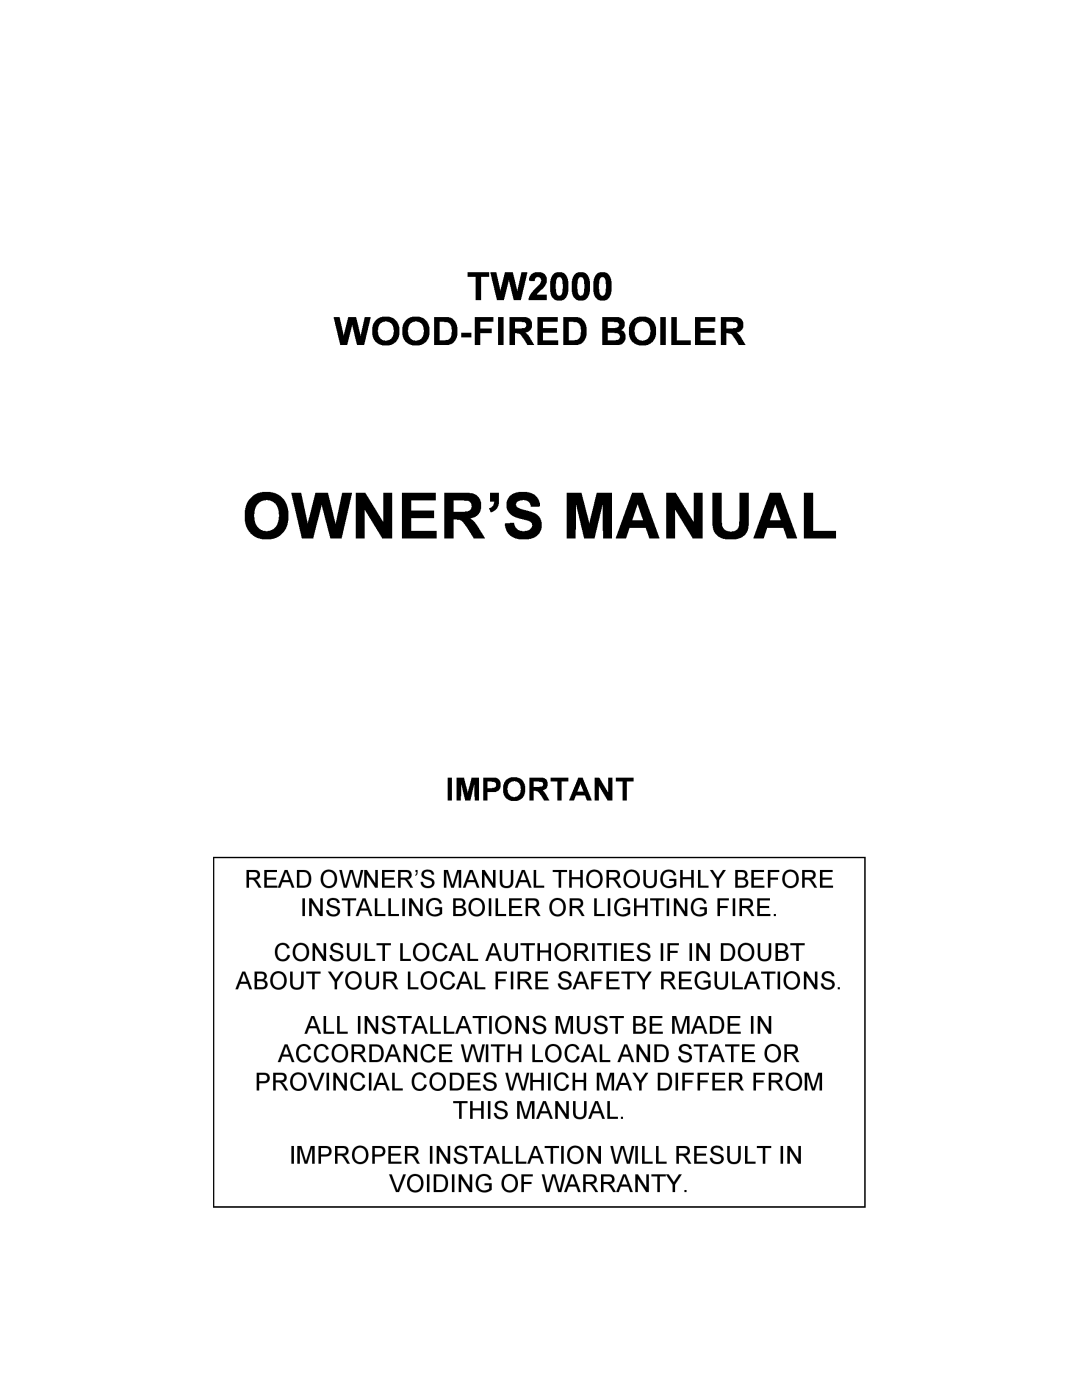 White Rodgers TW2000 owner manual Installing Boiler Or Lighting Fire, Consult Local Authorities If In Doubt 